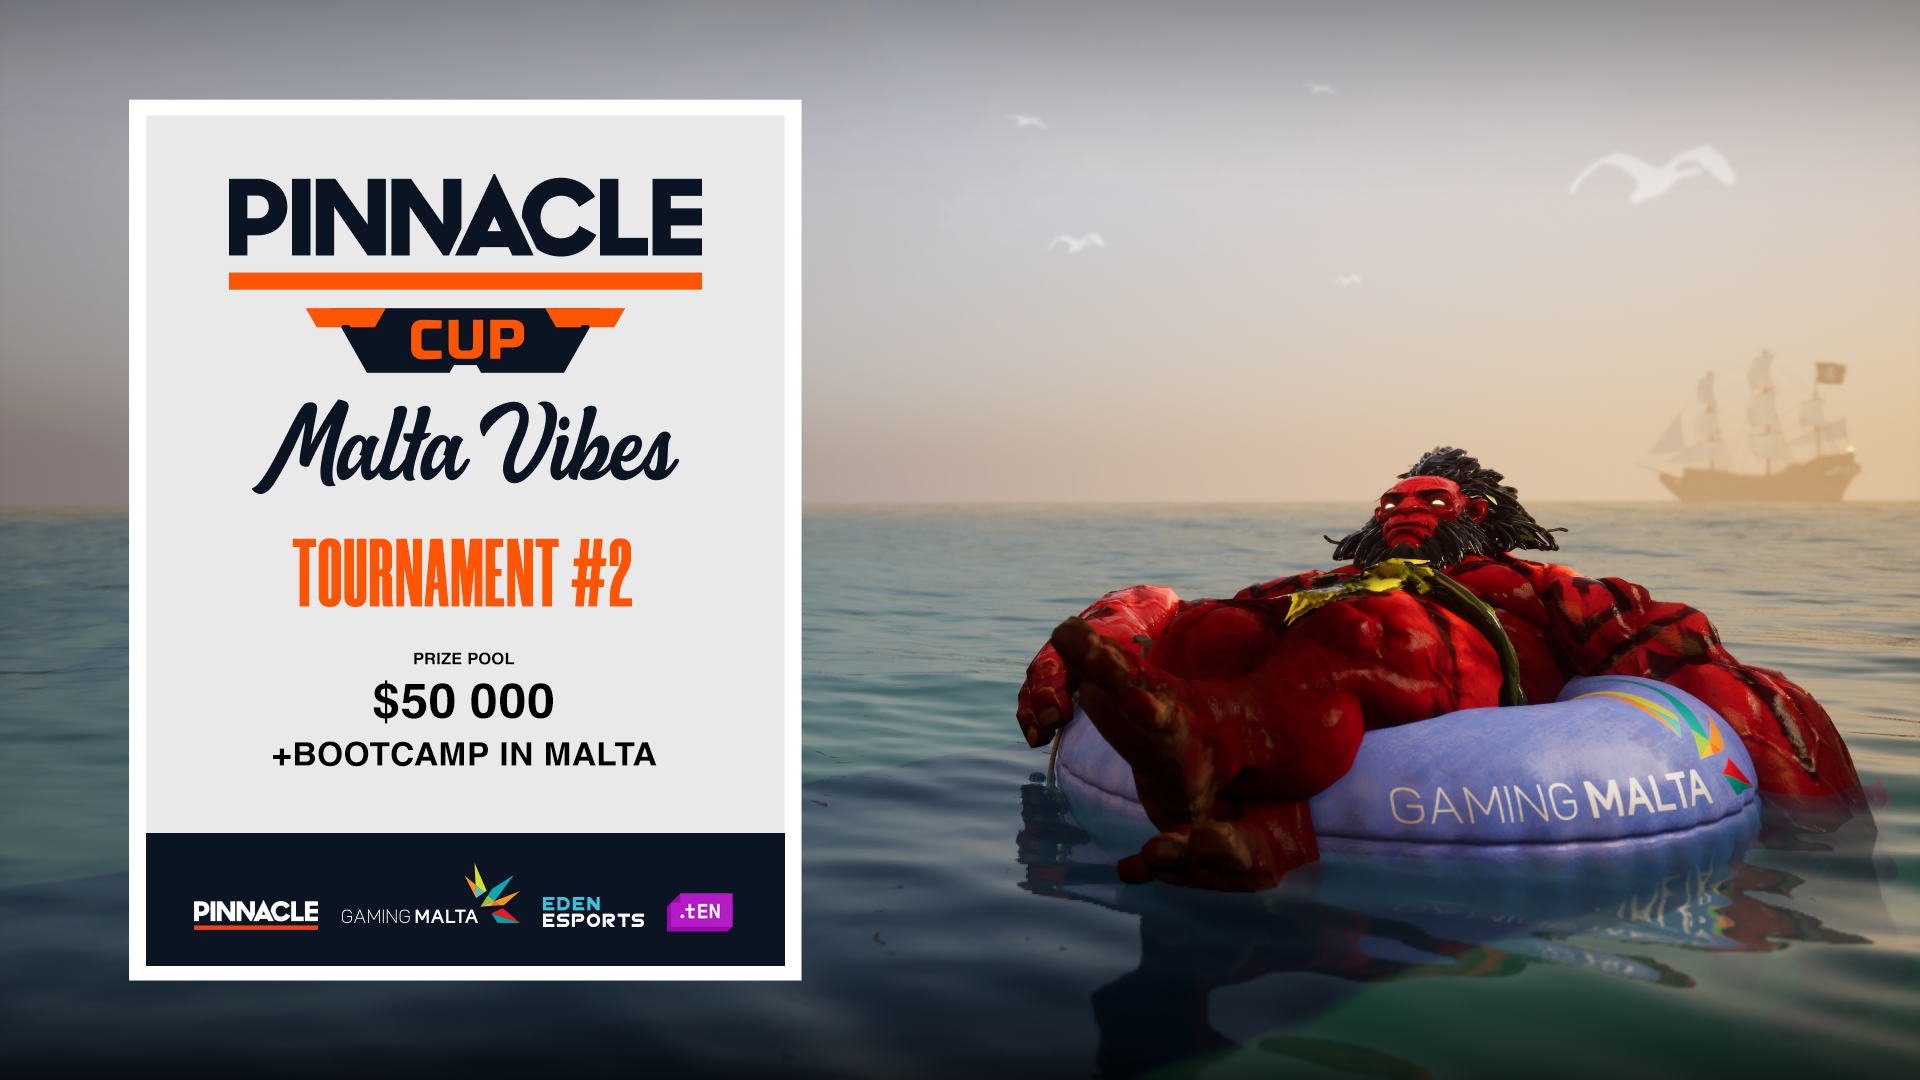 Pinnacle Cup Malta Vibes returns with the second event of the Series